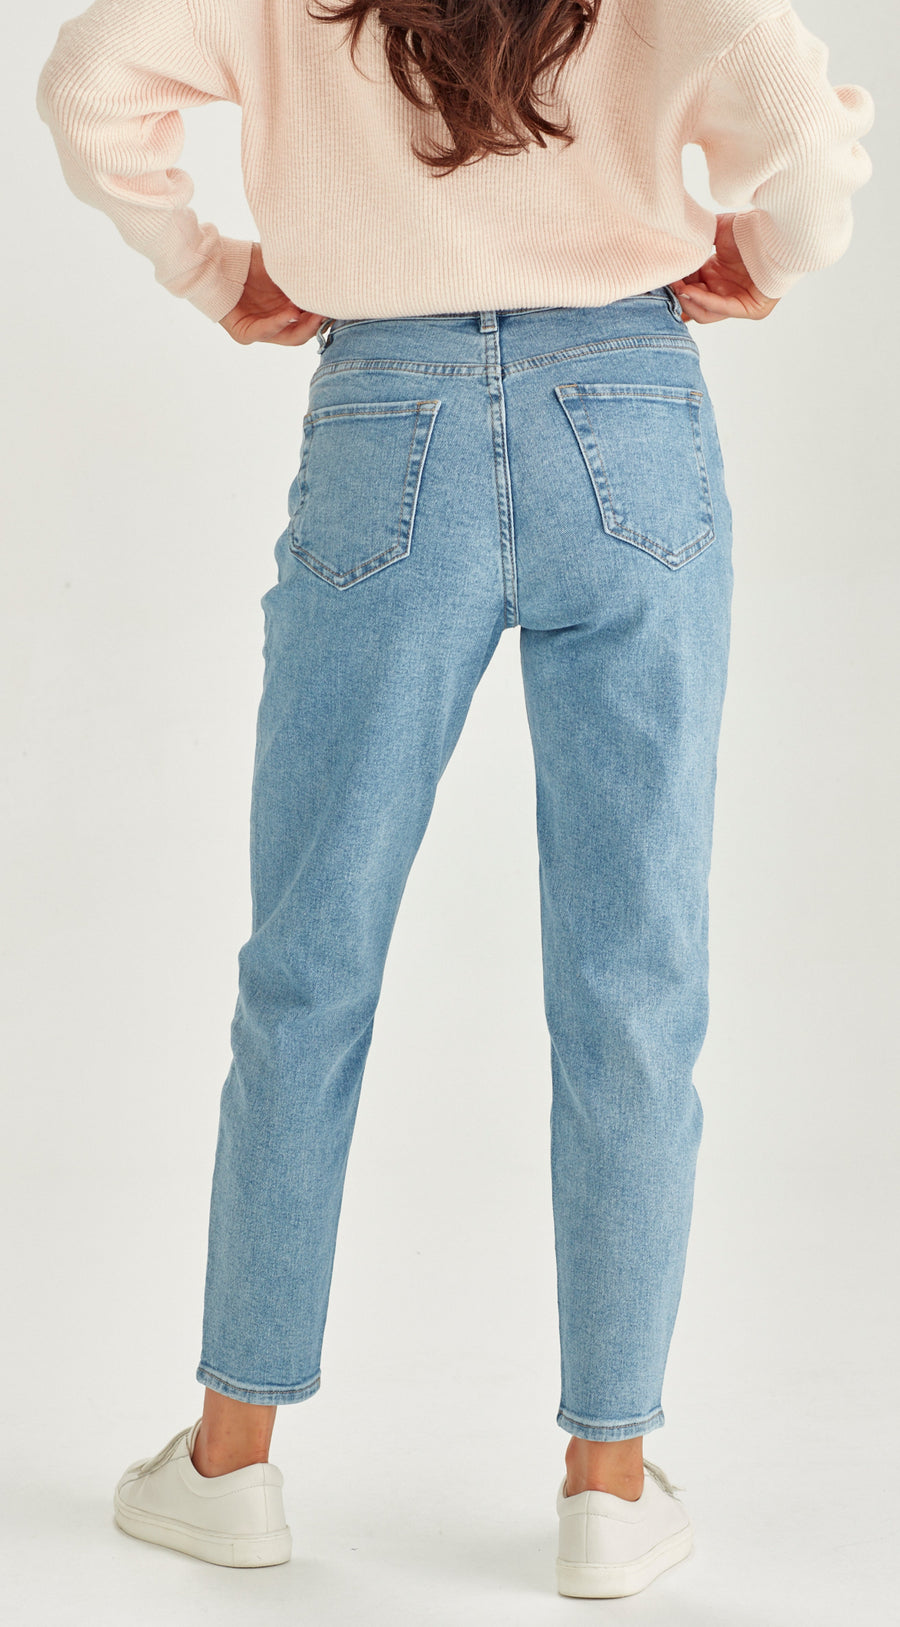 JUNKFOOD JEANS CONNIE - BLUE